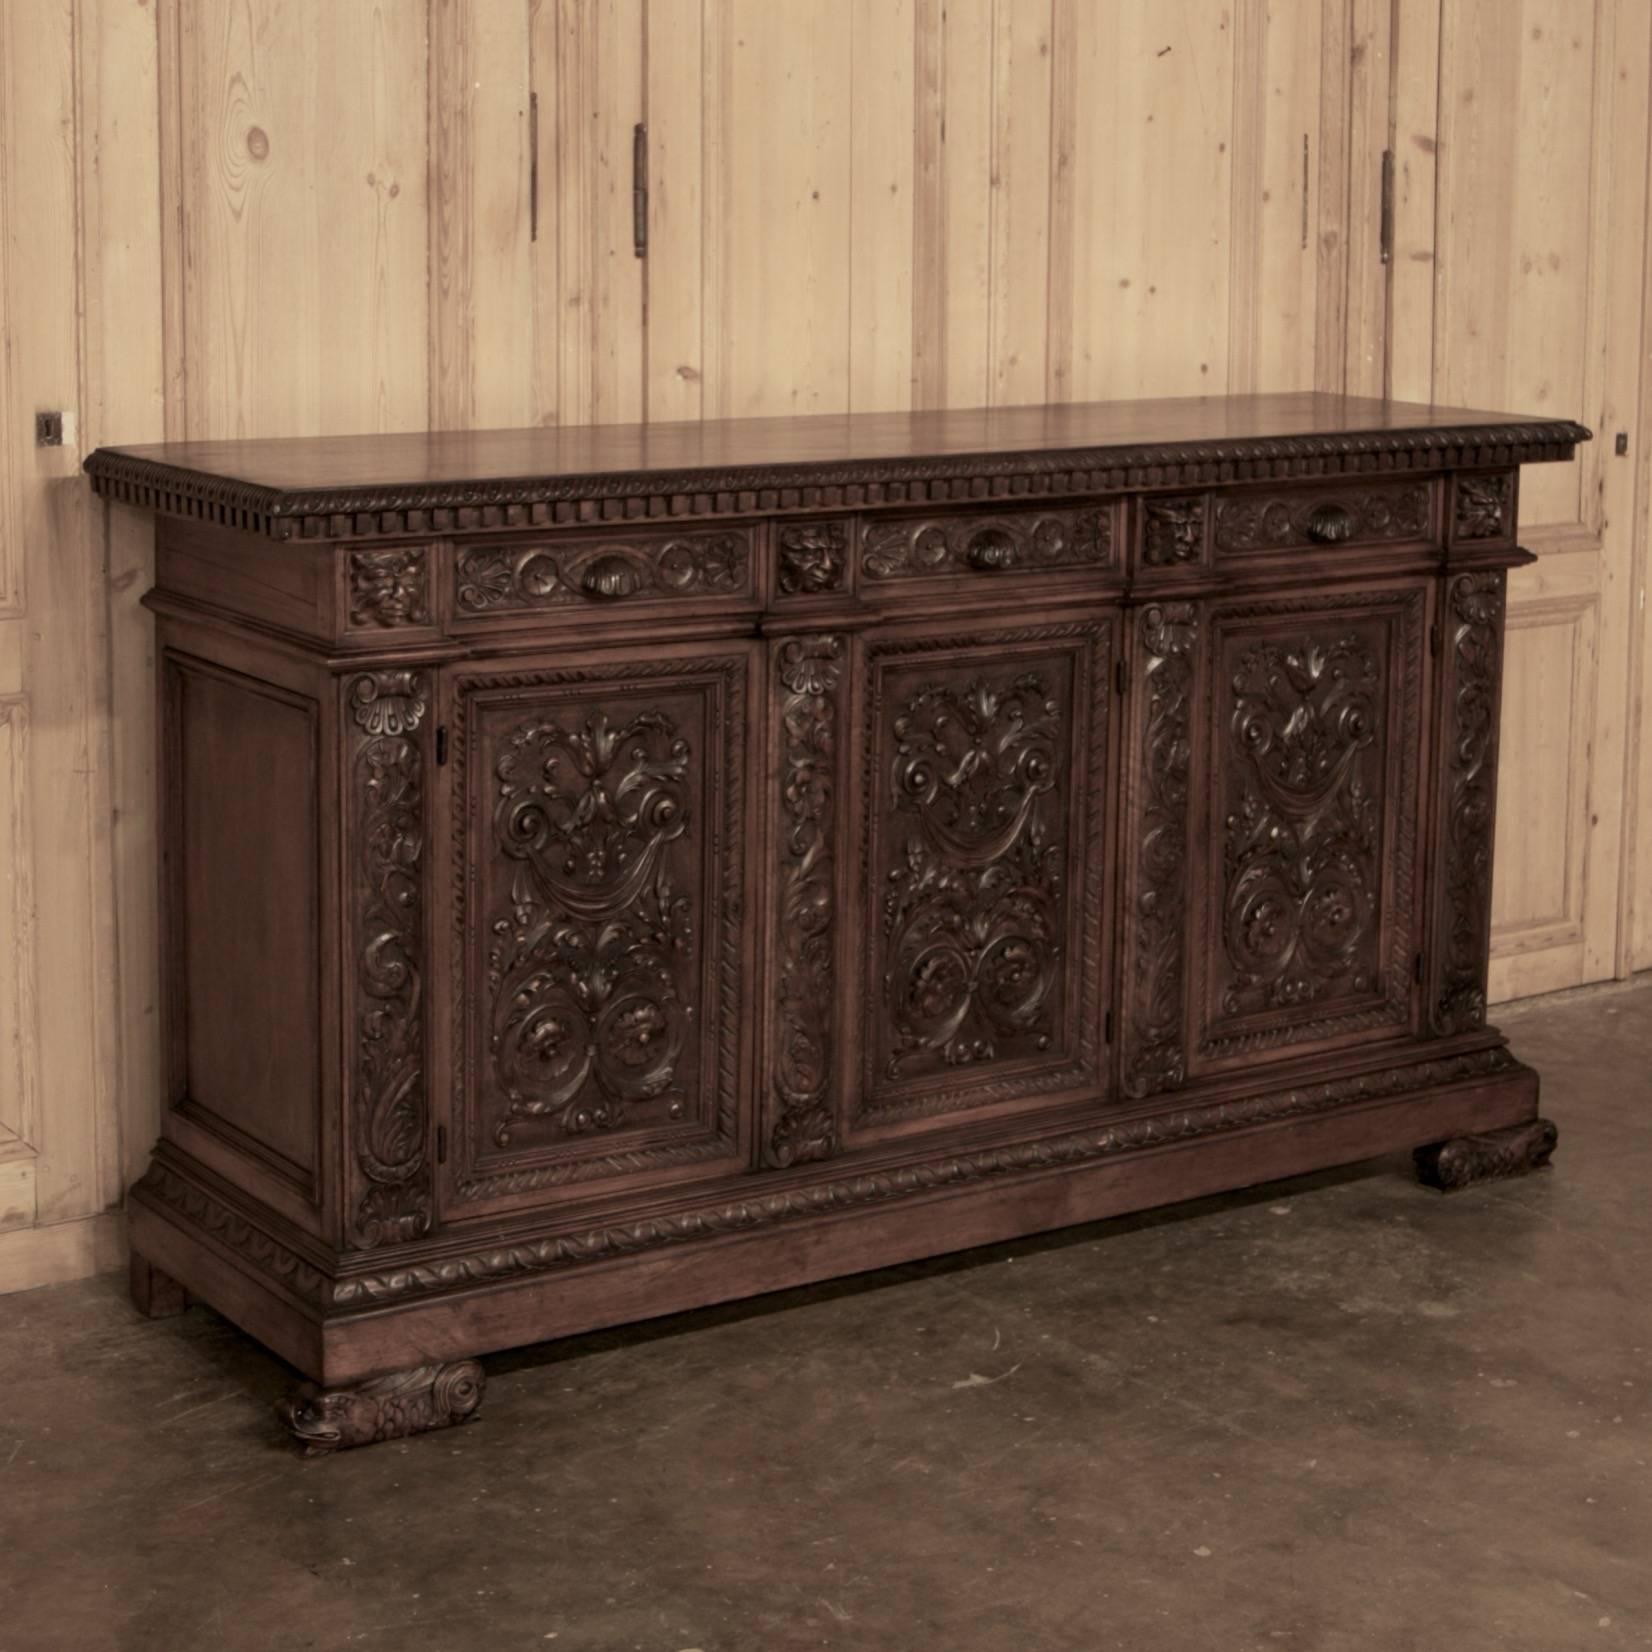 The splendor of the Renaissance style has been captured in fine Italian Walnut with this exceptional Hand-Carved Antique Buffet! Featuring elaborate relief carved into each of three large door panels surrounded by bold molding, carved drawer